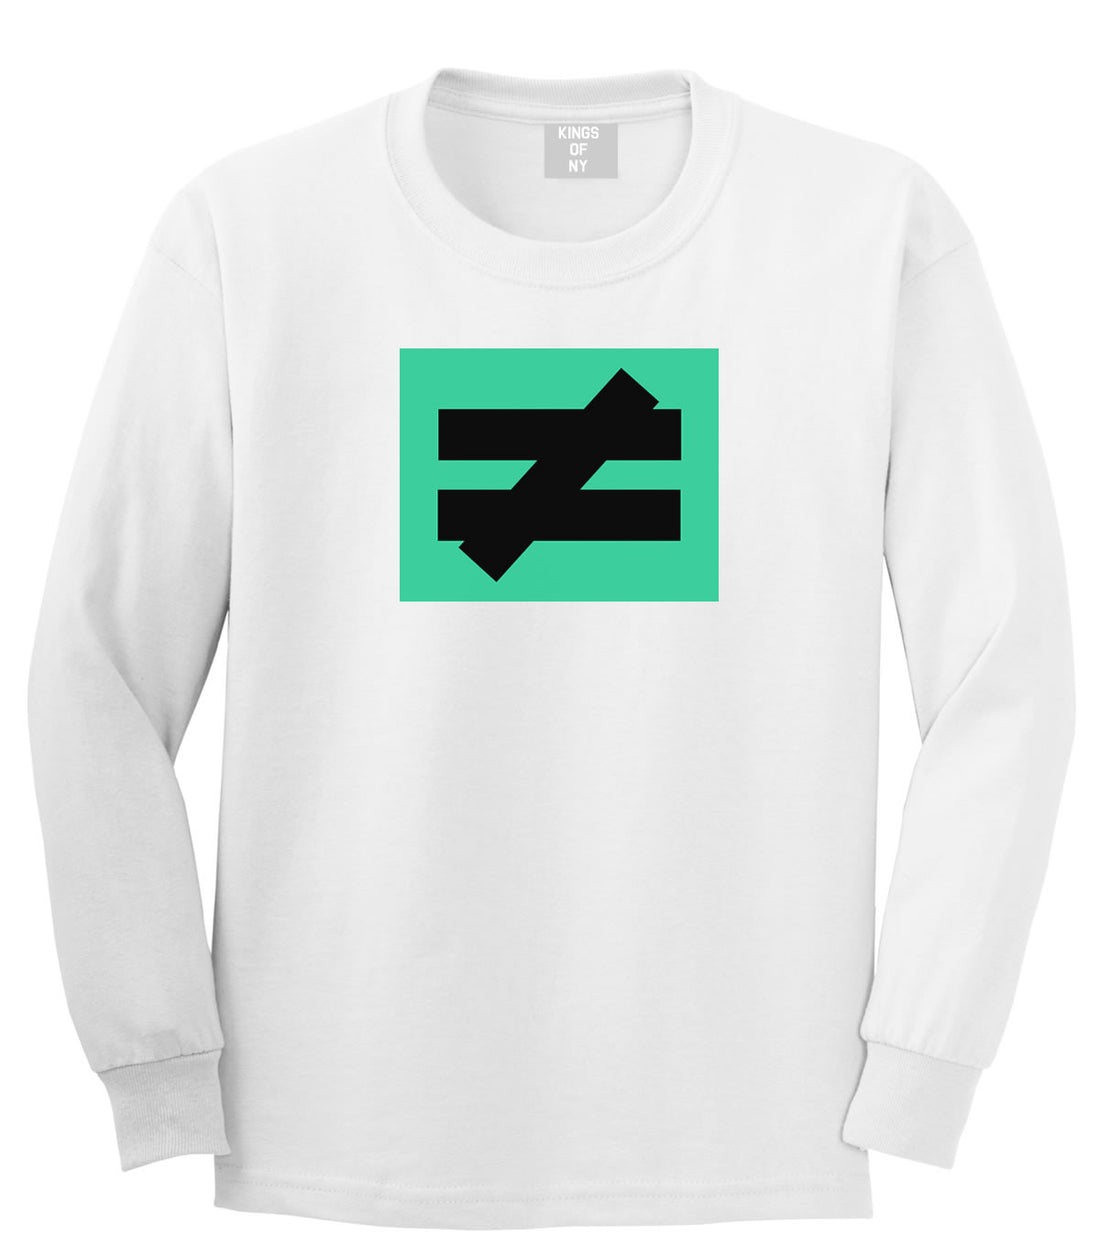 No Equal No Competition Long Sleeve T-Shirt in White by Kings Of NY